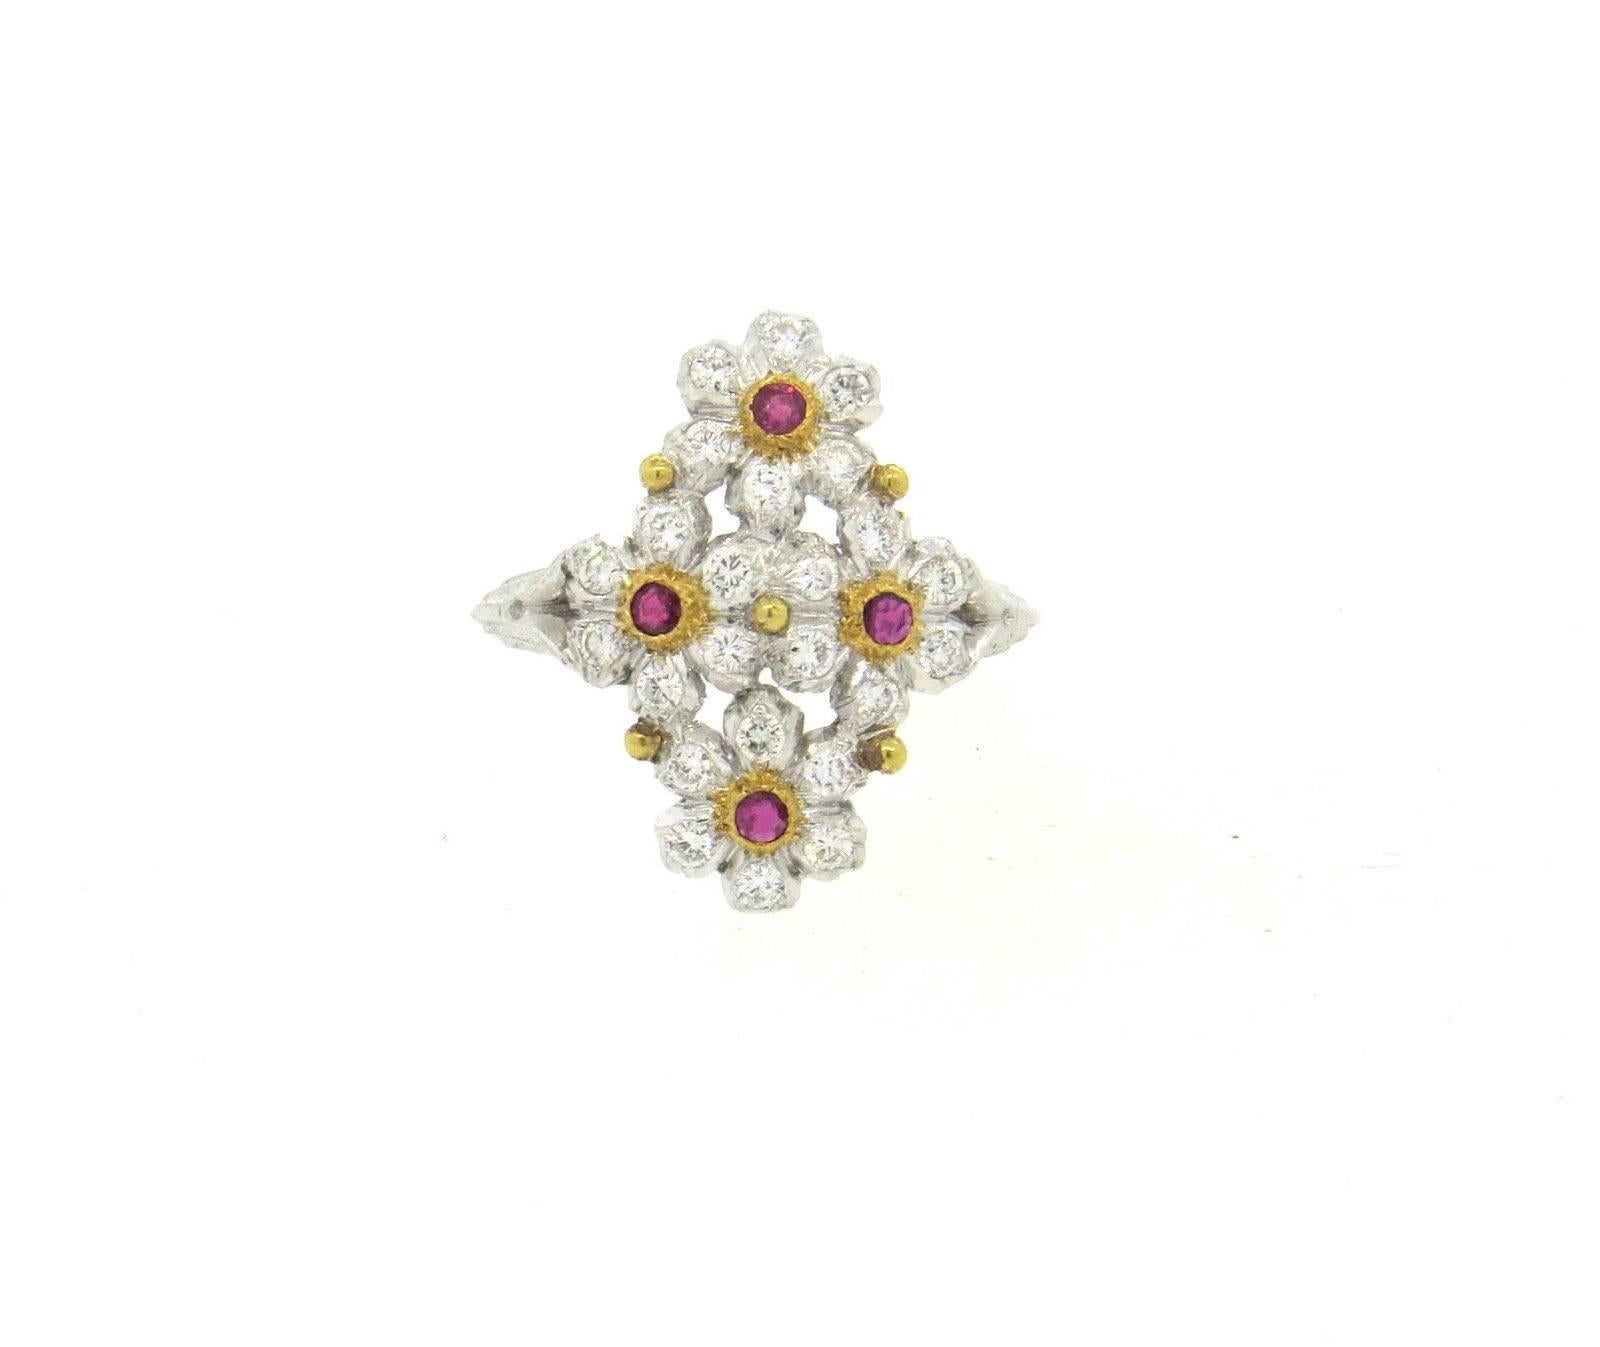 Delicate 18k white and yellow gold flower ring, crafted by Buccellati, featuring 0.48ctw in H/VS diamonds and 0.25ctw in rubies. Ring size 6.75; ring top is 21mm x 15mm. Marked: Buccellati Italy, 18k, 750,L0659. Weight of the piece - 3.88 grams